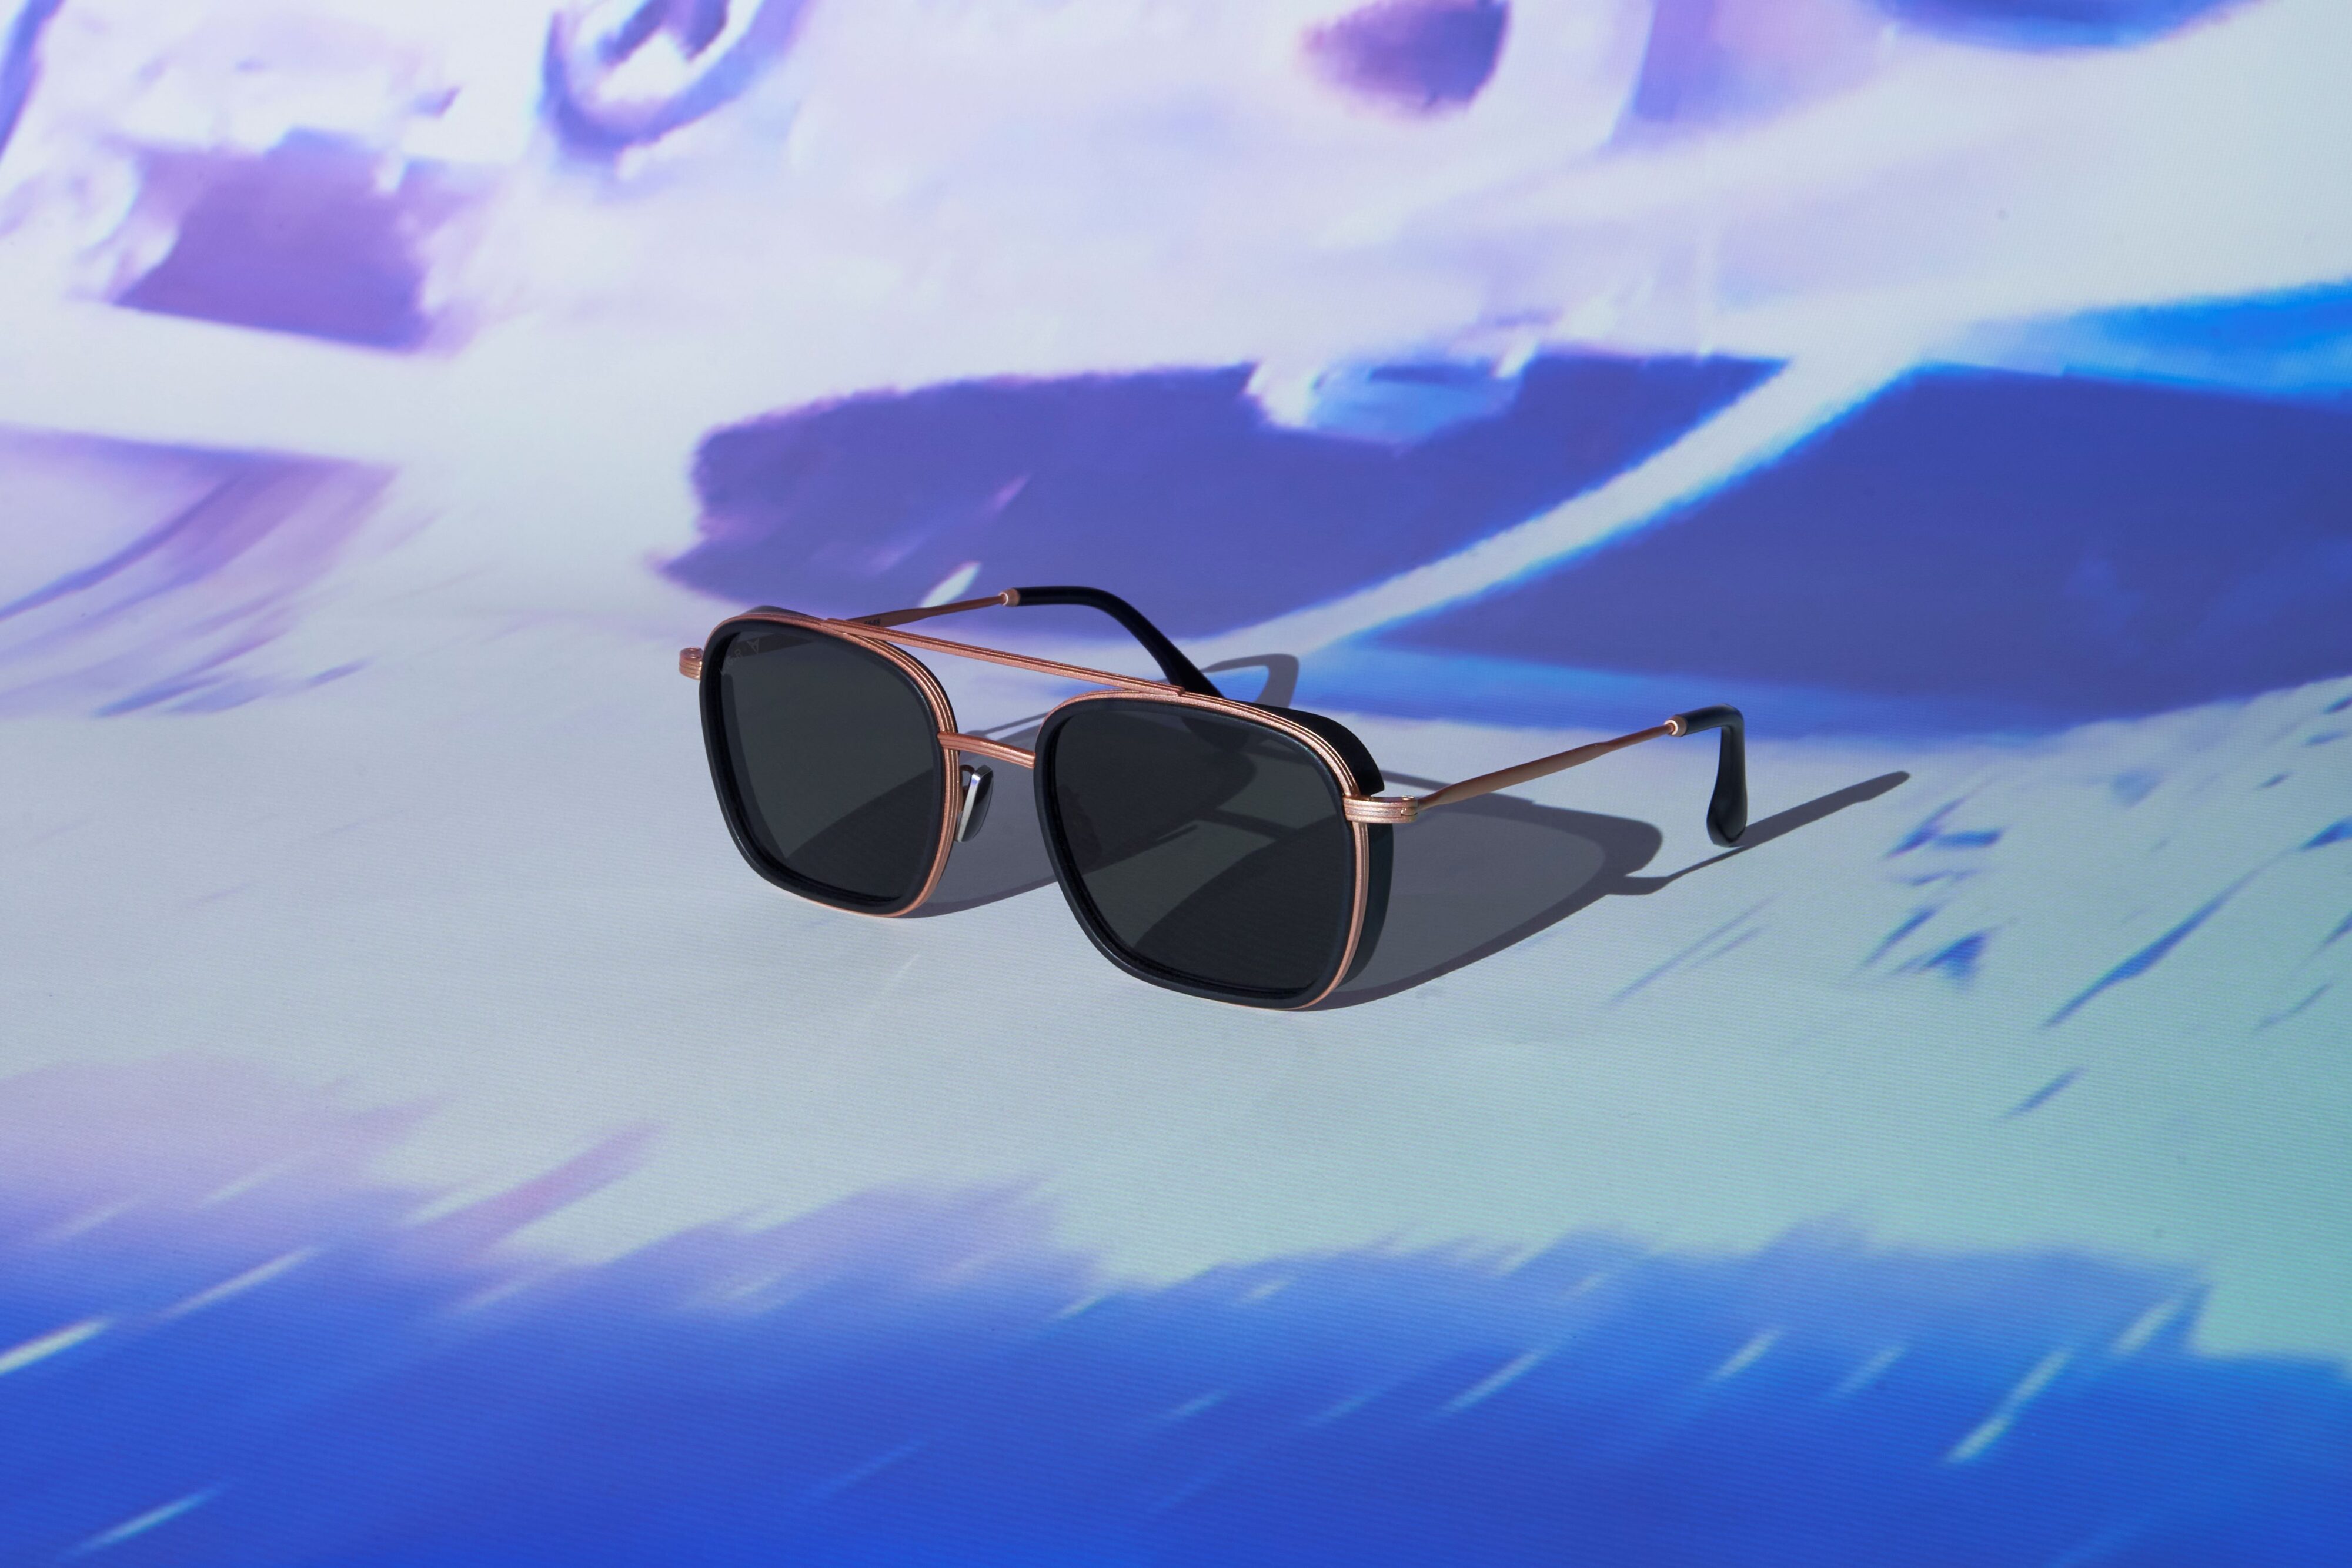 A sunglass style from the special collection between Cupra and L.G.R eyewear